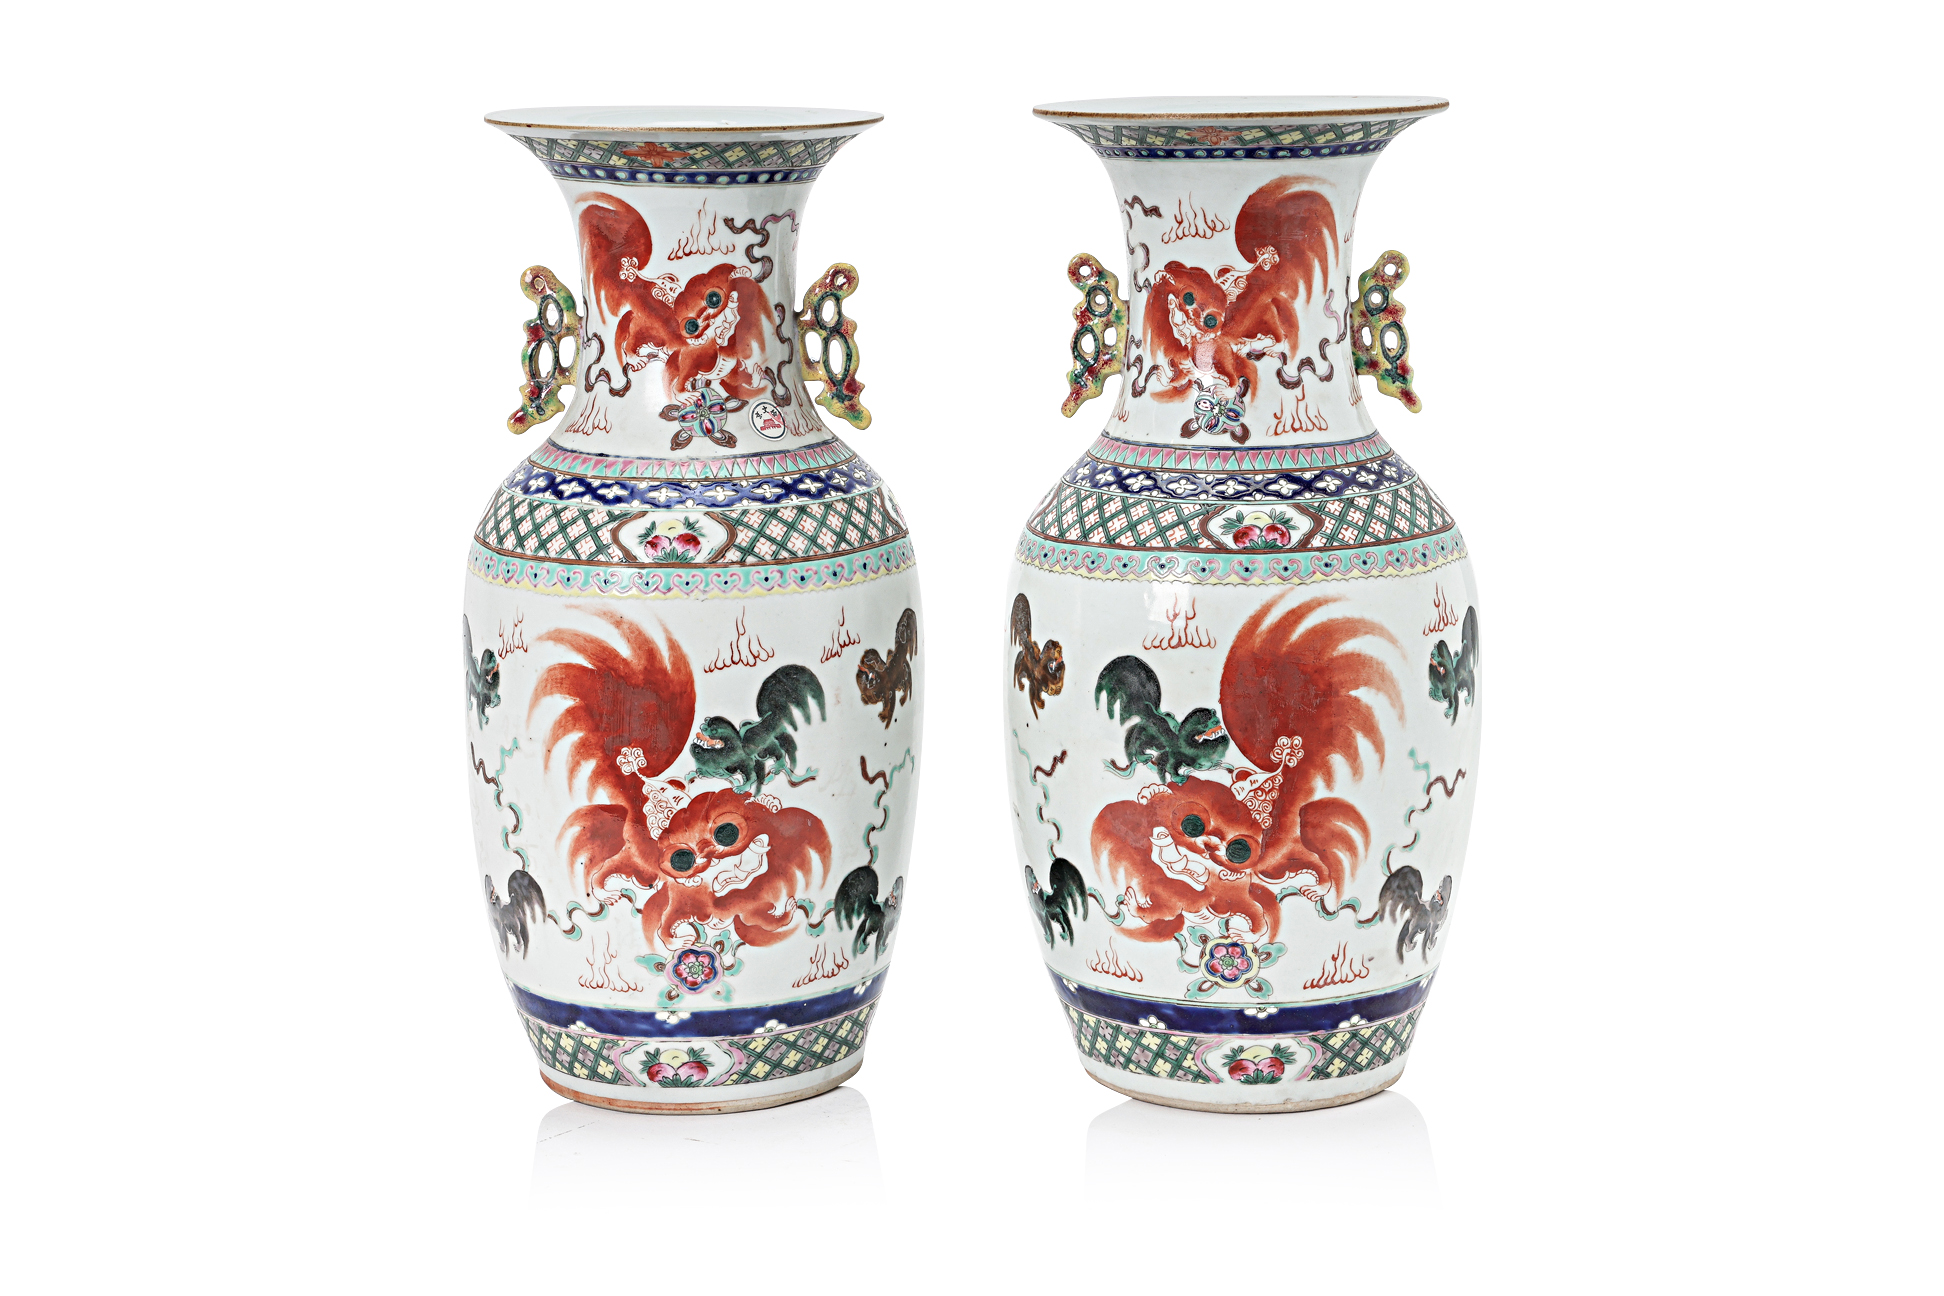 A PAIR OF FAMILLE ROSE TWIN HANDLED BALUSTER VASES